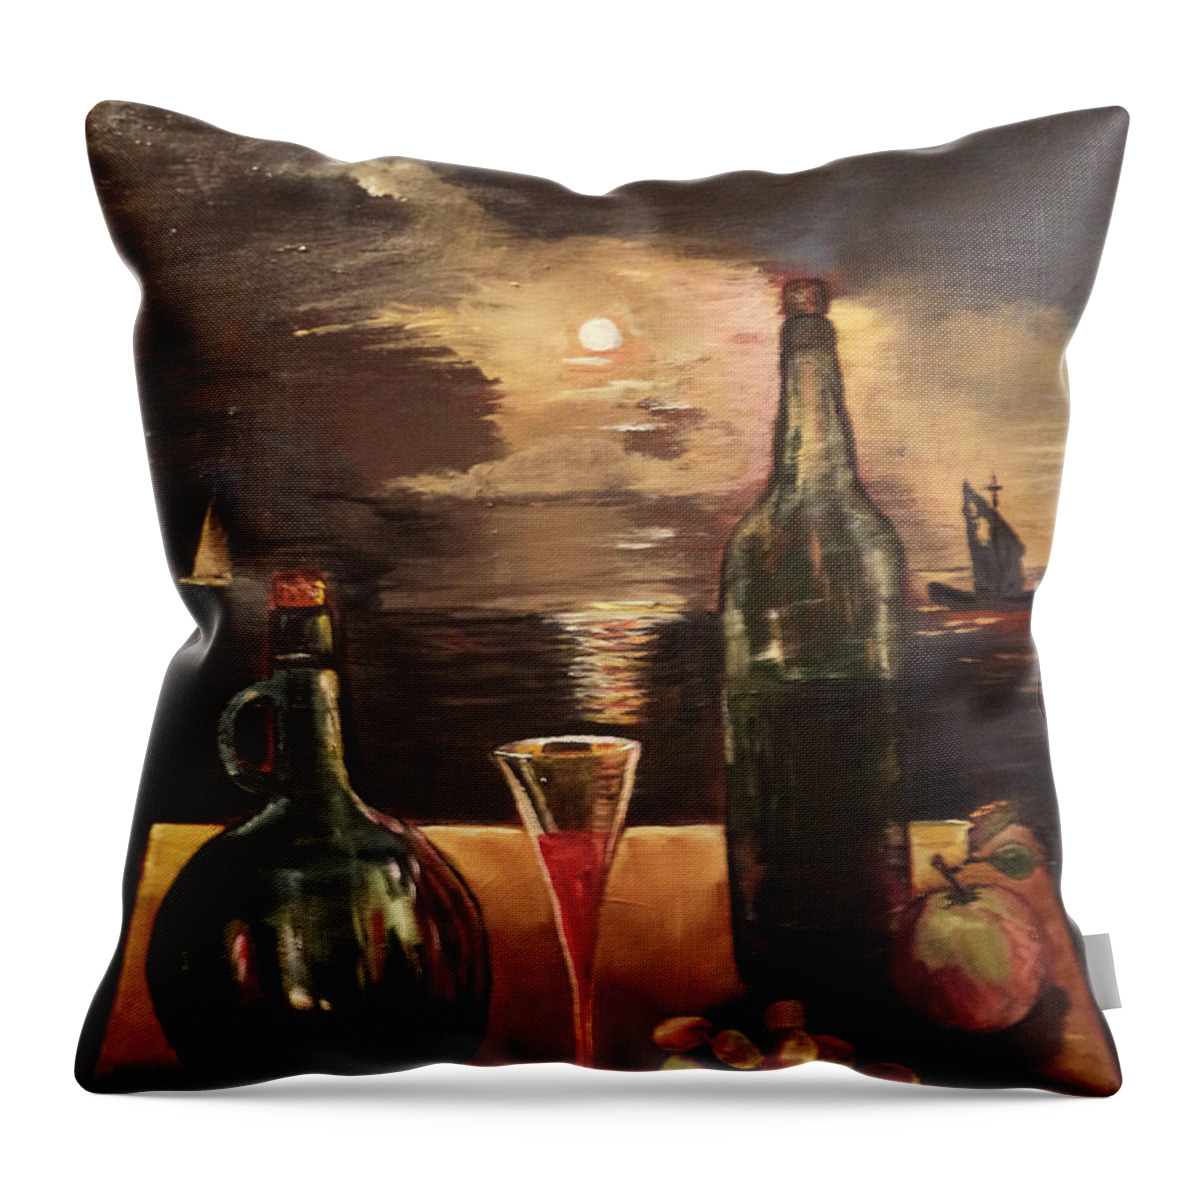 Wine Bottles Throw Pillow featuring the painting Vintage Wine by Arlen Avernian - Thorensen